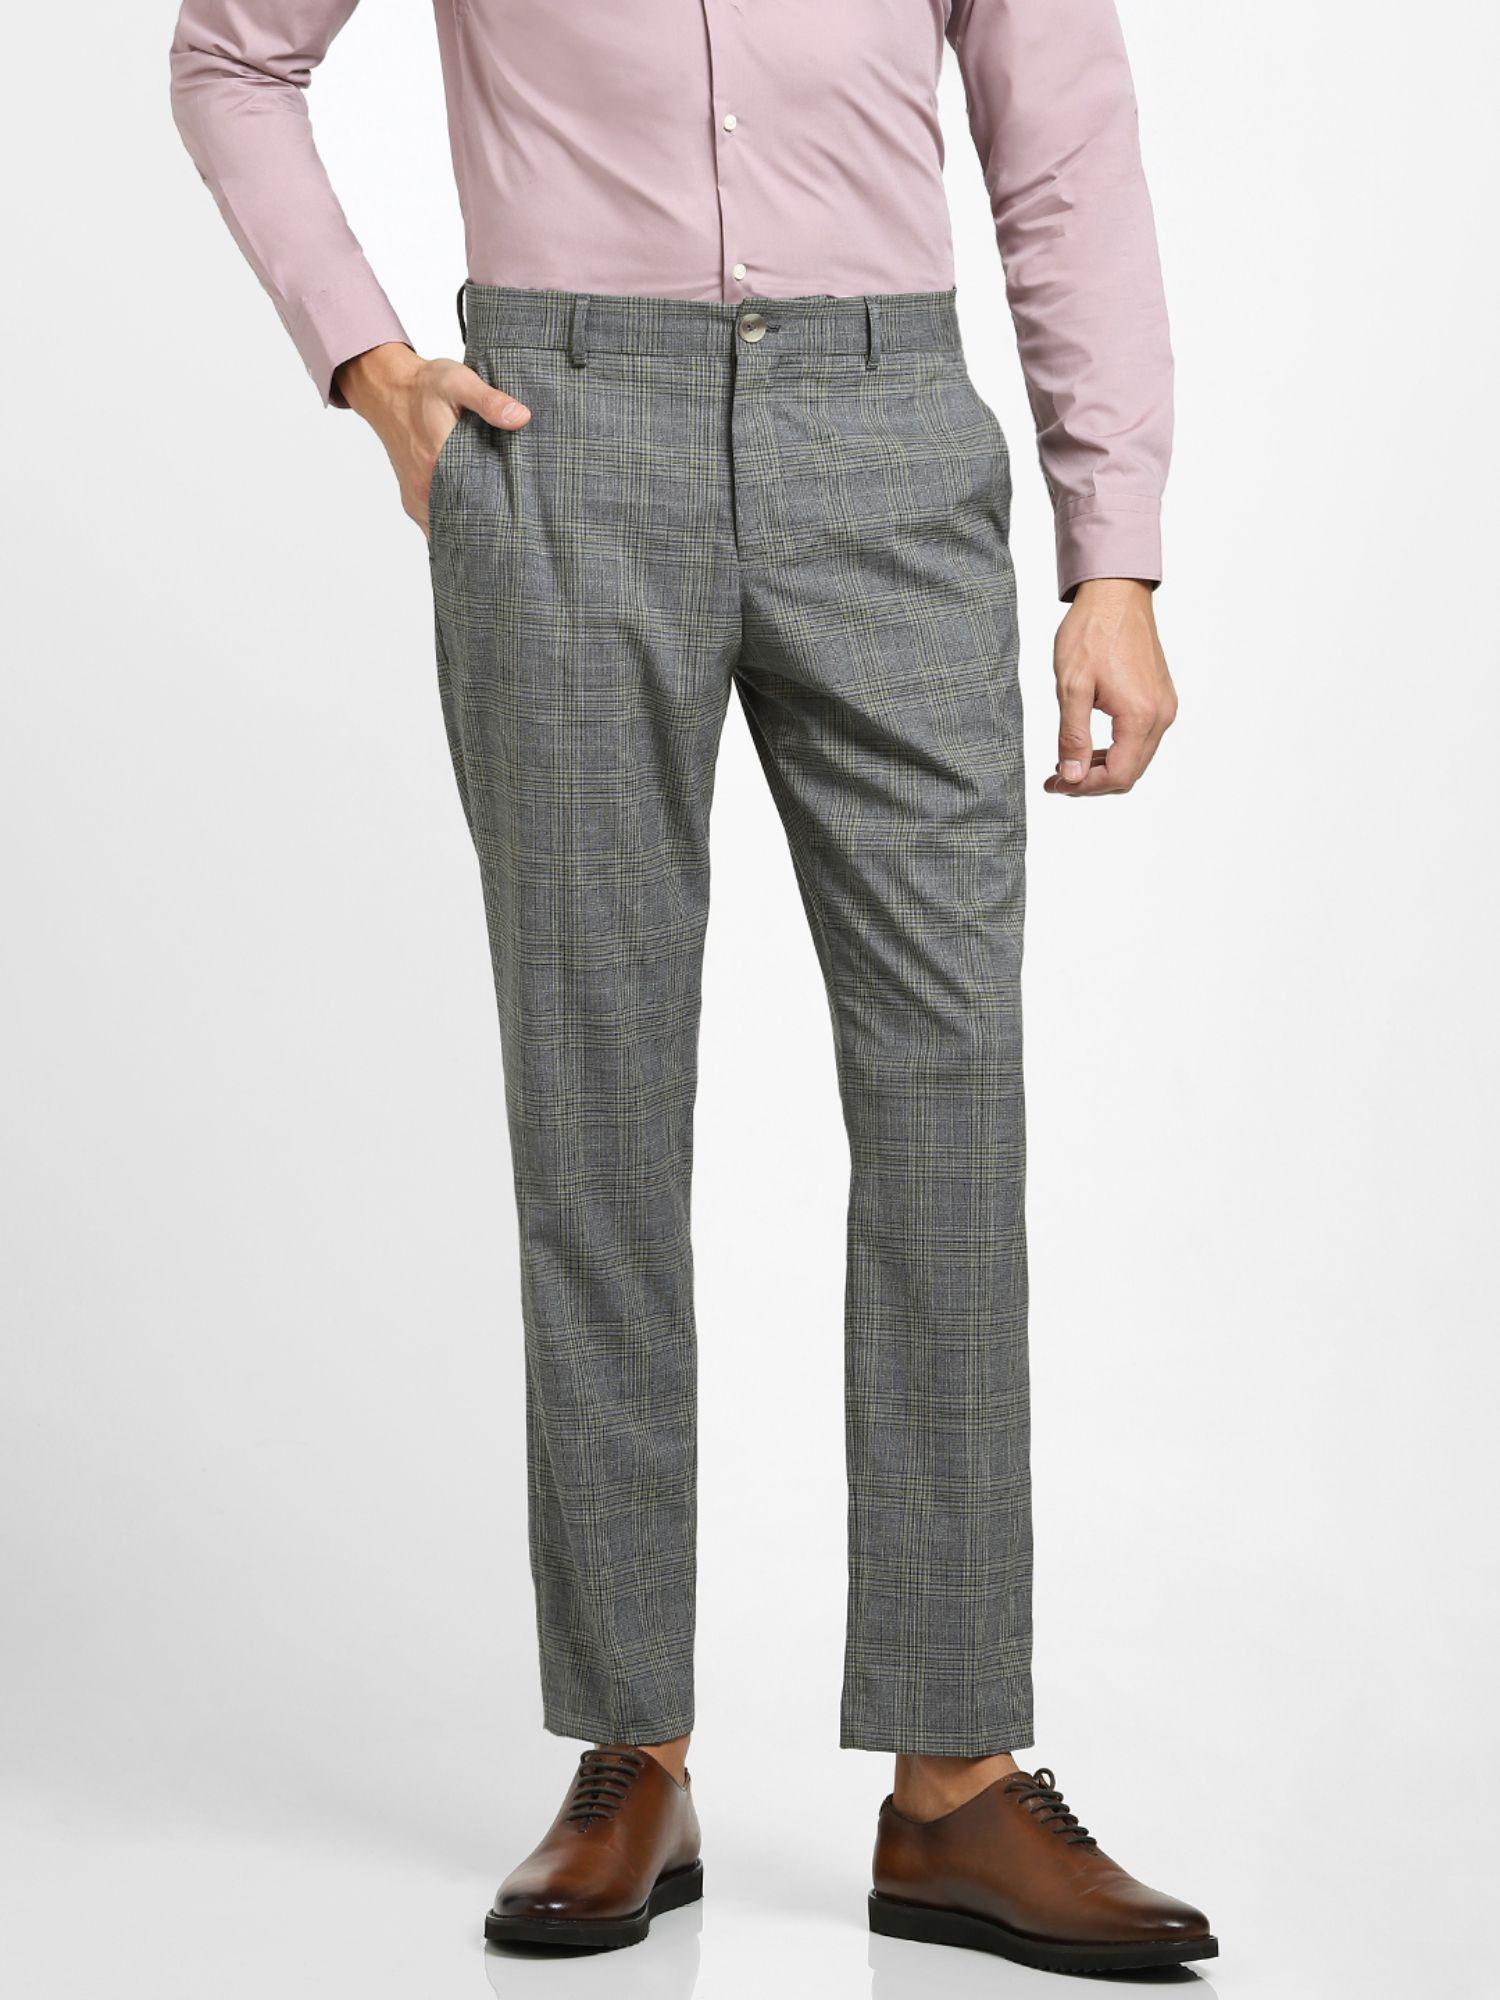 checked formal grey trouser